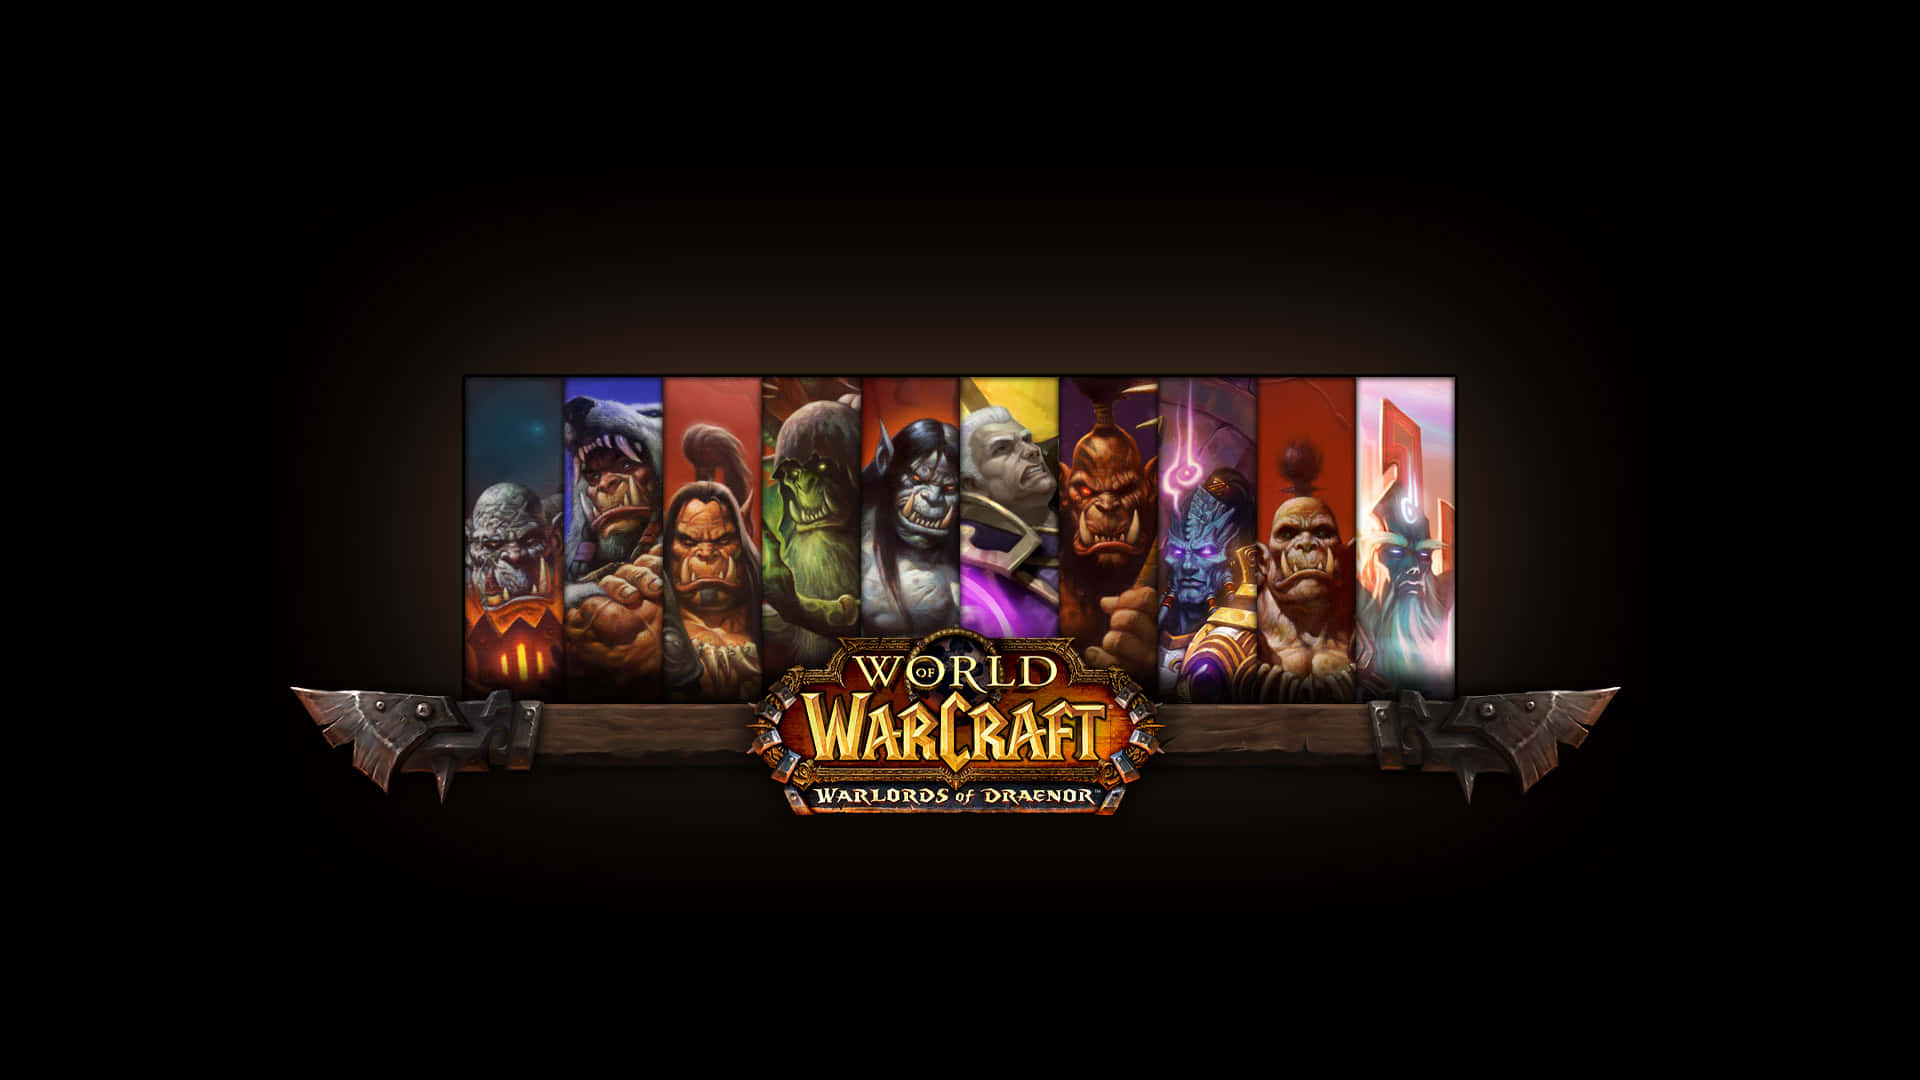 An Epic Battle In World Of Warcraft: Warlords Of Draenor Wallpaper